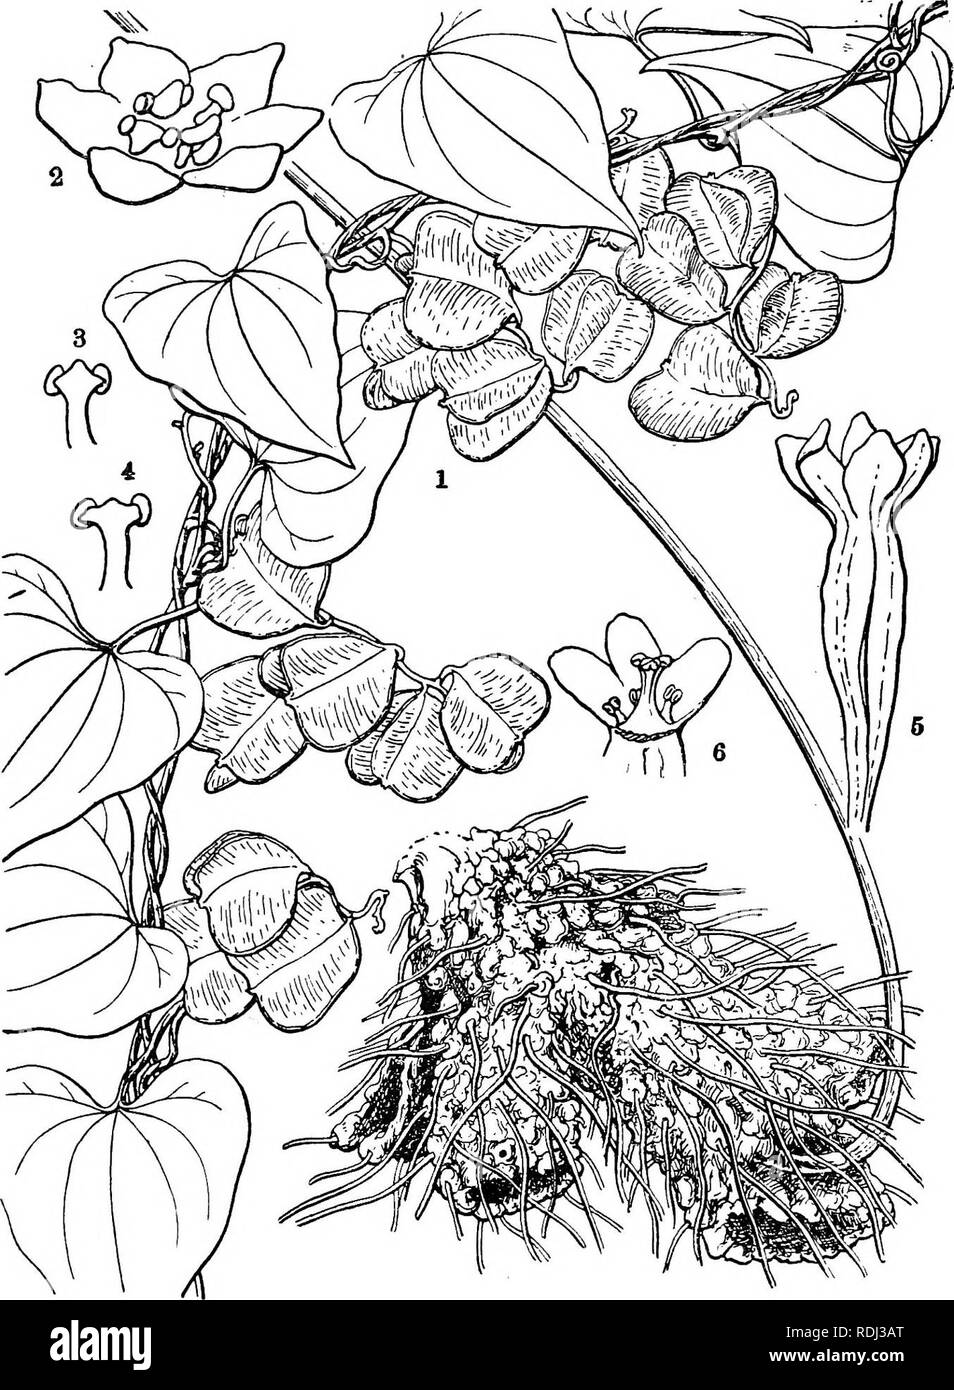 . Icones plantarum formosanarum nec non et contributiones ad floram formosanam; or, Icones of the plants of Formosa, and materials for a flora of the island, based on a study of the collections of the Botanical survey of the Government of Formosa. Botany. 38 DIOSCOEEACEffi.. Fig. 19, Dioscorea kelungensU Haxata ; 3, the plant; 2, ,i male flower; 3, 4, a stamen, seen from different sides; 5, a female flower; 6, apical portion of L femLle flower, partly taken off.. Please note that these images are extracted from scanned page images that may have been digitally enhanced for readability - colorat Stock Photo